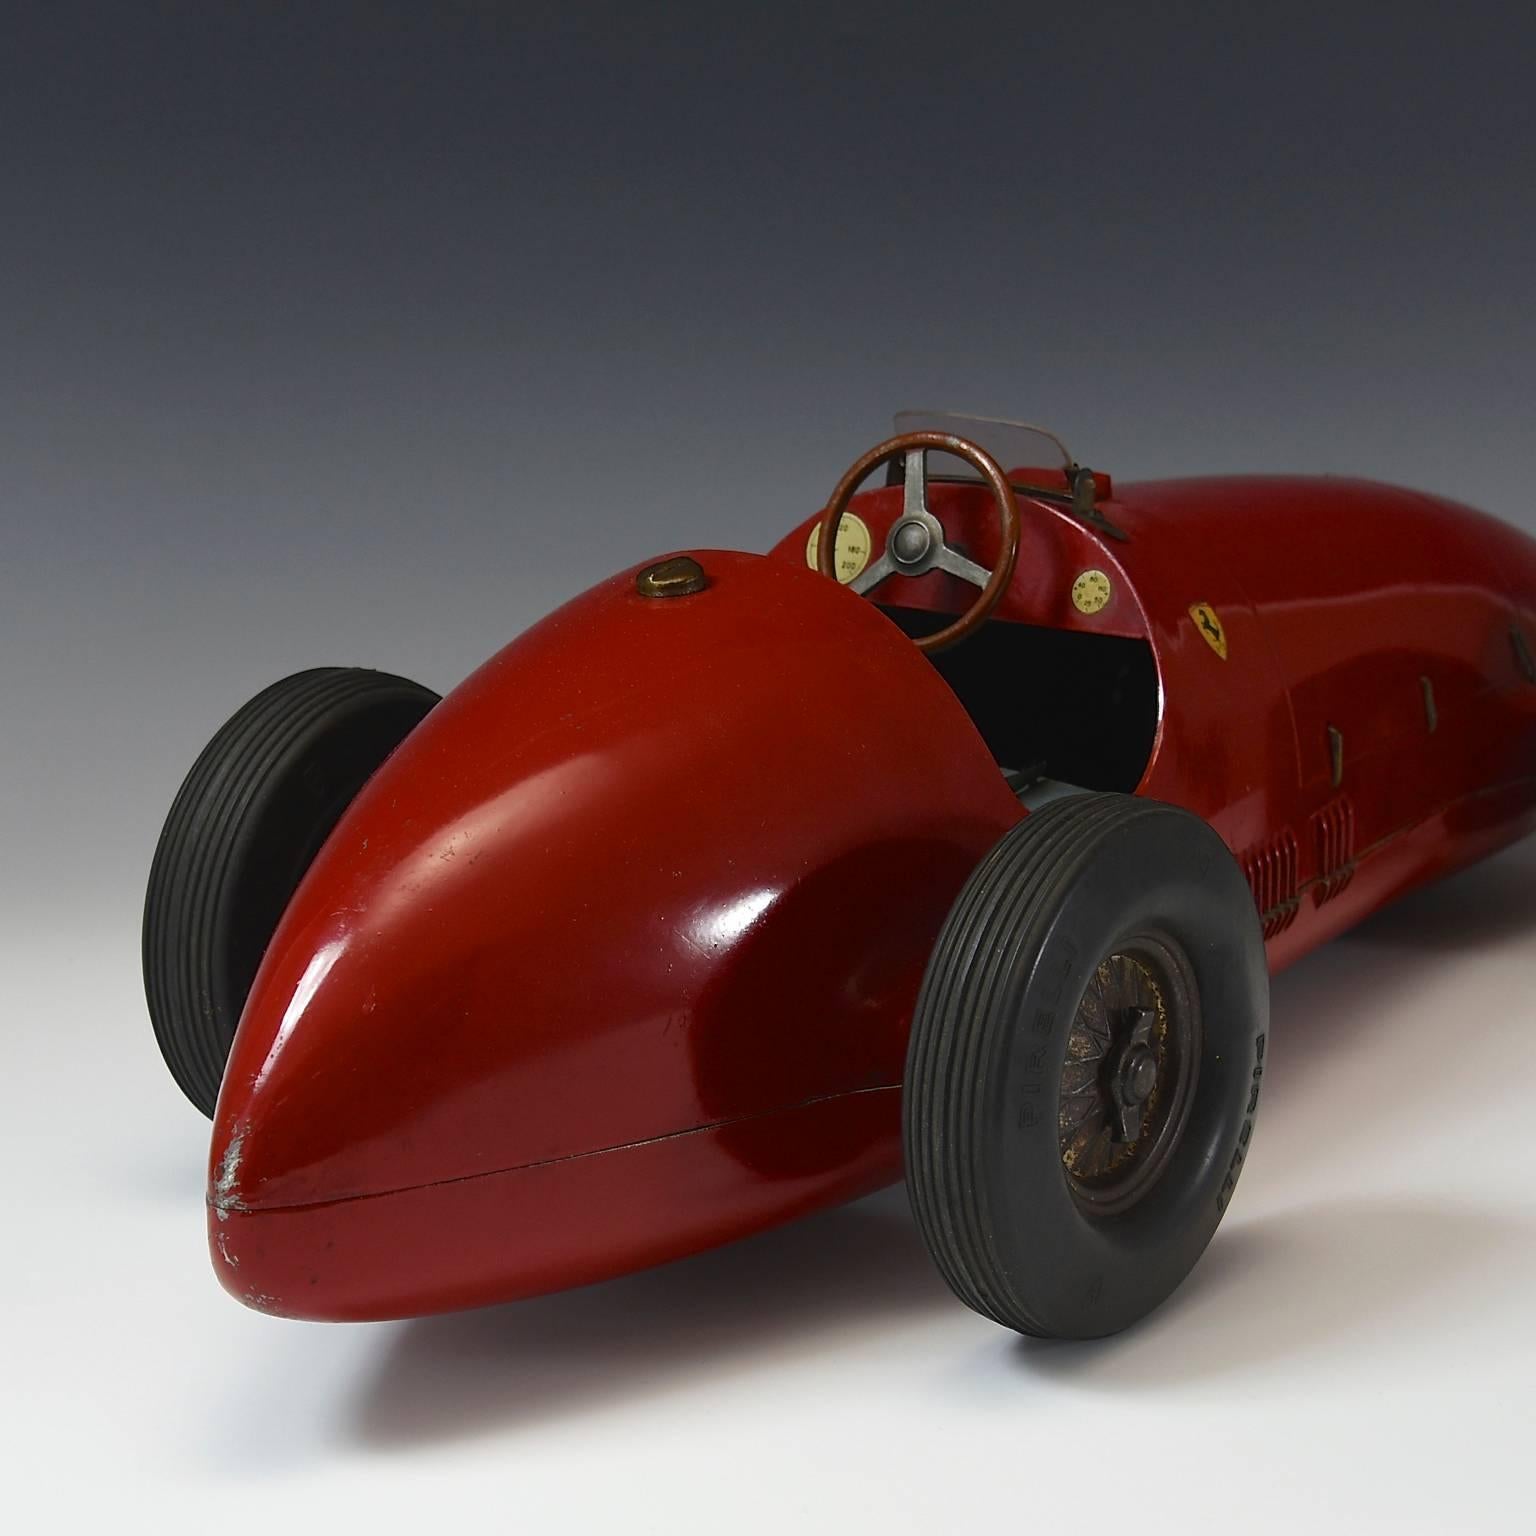 A terrific 1950's model Ferrari F500 F2:
During the 1952 season Alberto Ascari and his Ferrari F500 F2 were in a class of their own; he dominated the world championship, winning each of the six Grands Prix he entered that year. Over 1952 and 1953 he